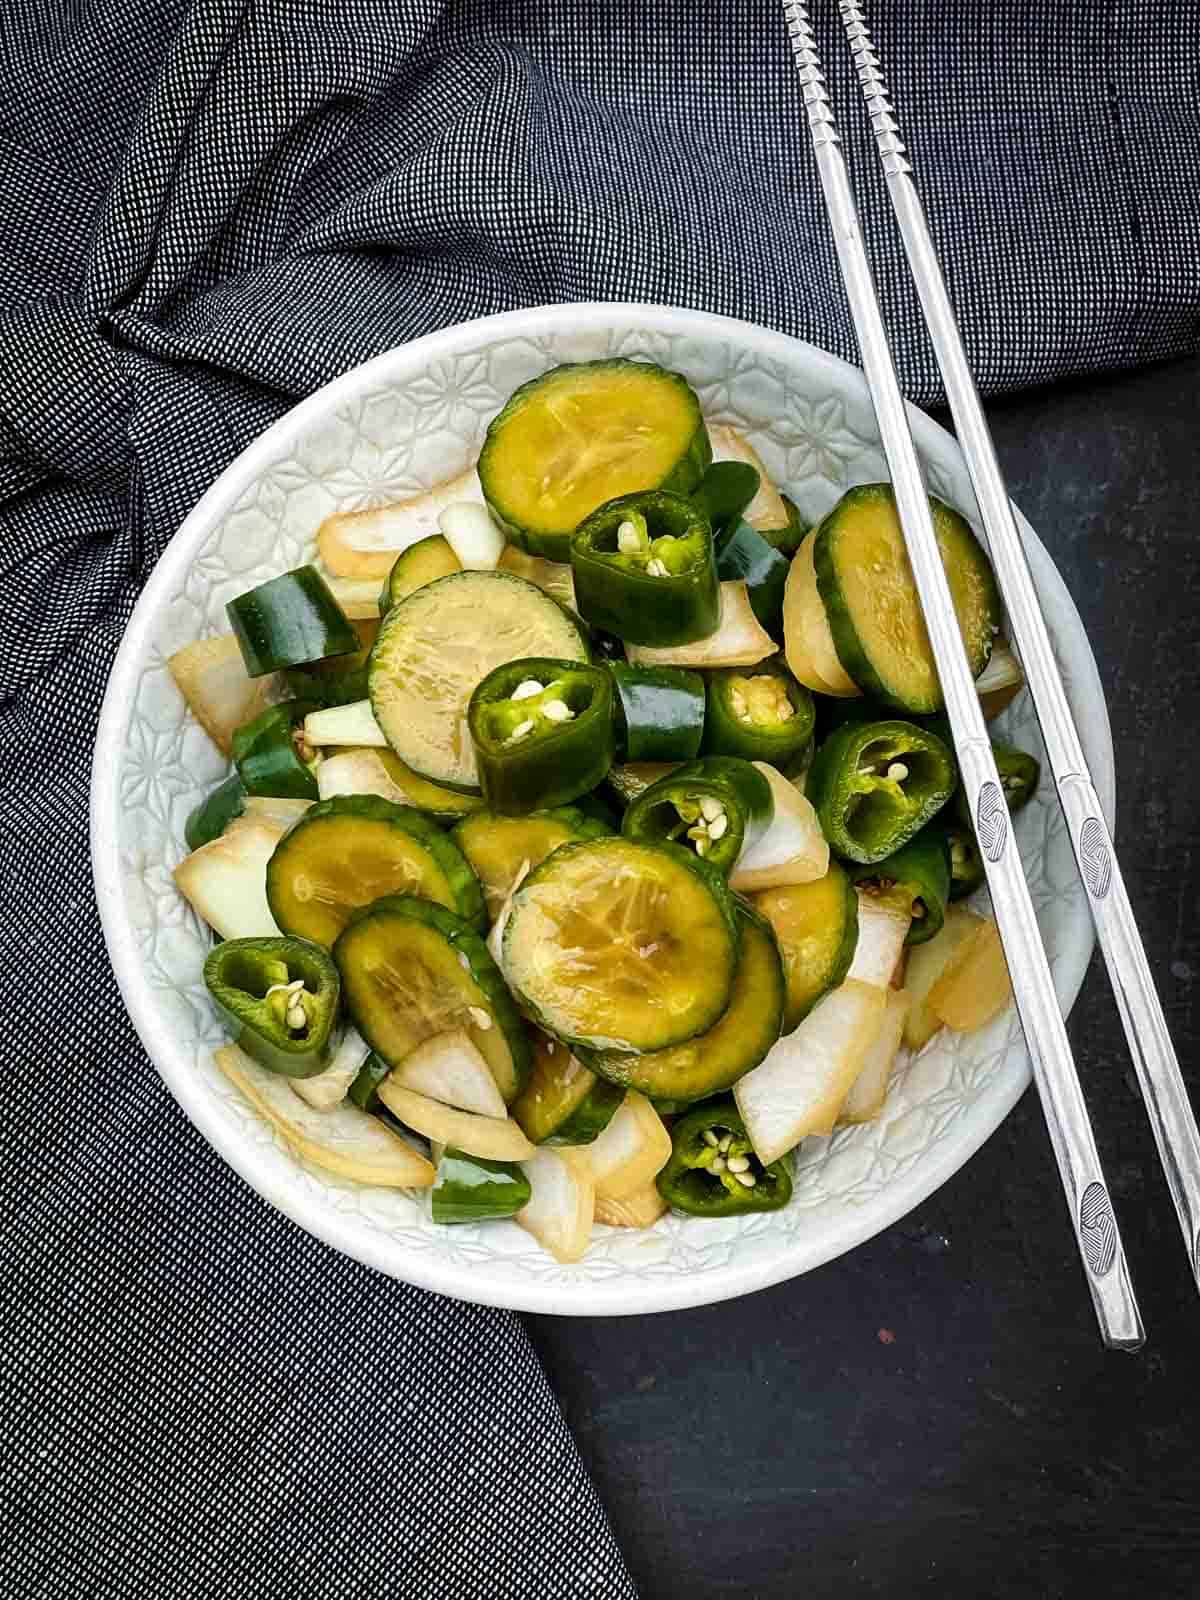 Korean Pickles in Soy Sauce - Jangajji in a white bowl with chopsticks and blue napkins